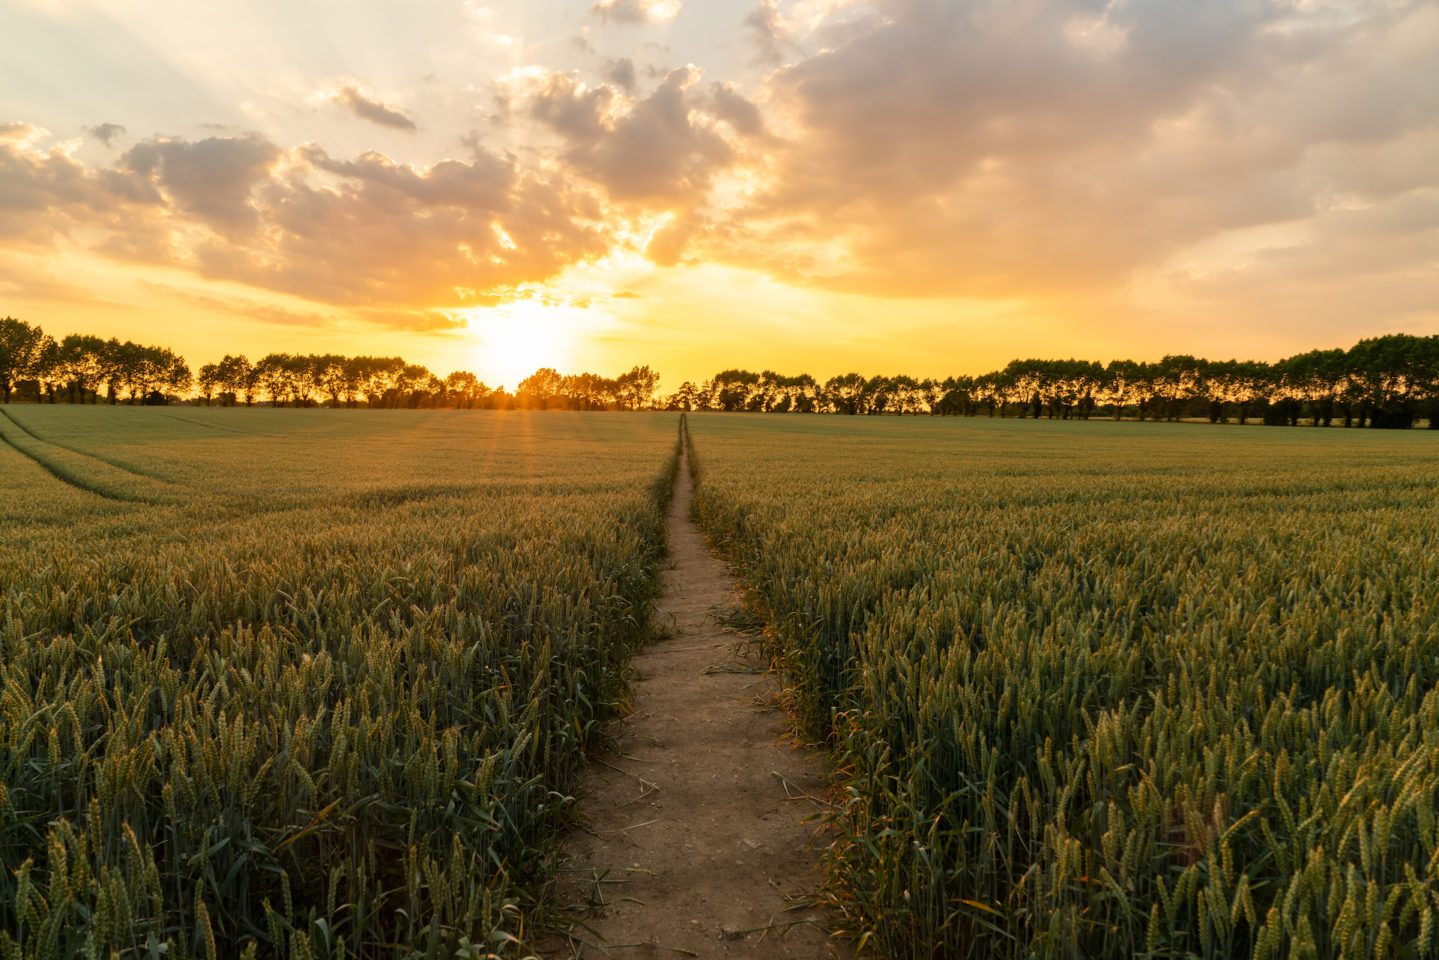 Journey travel concept sunset or sunrise over path through countryside field of wheat or barley crops